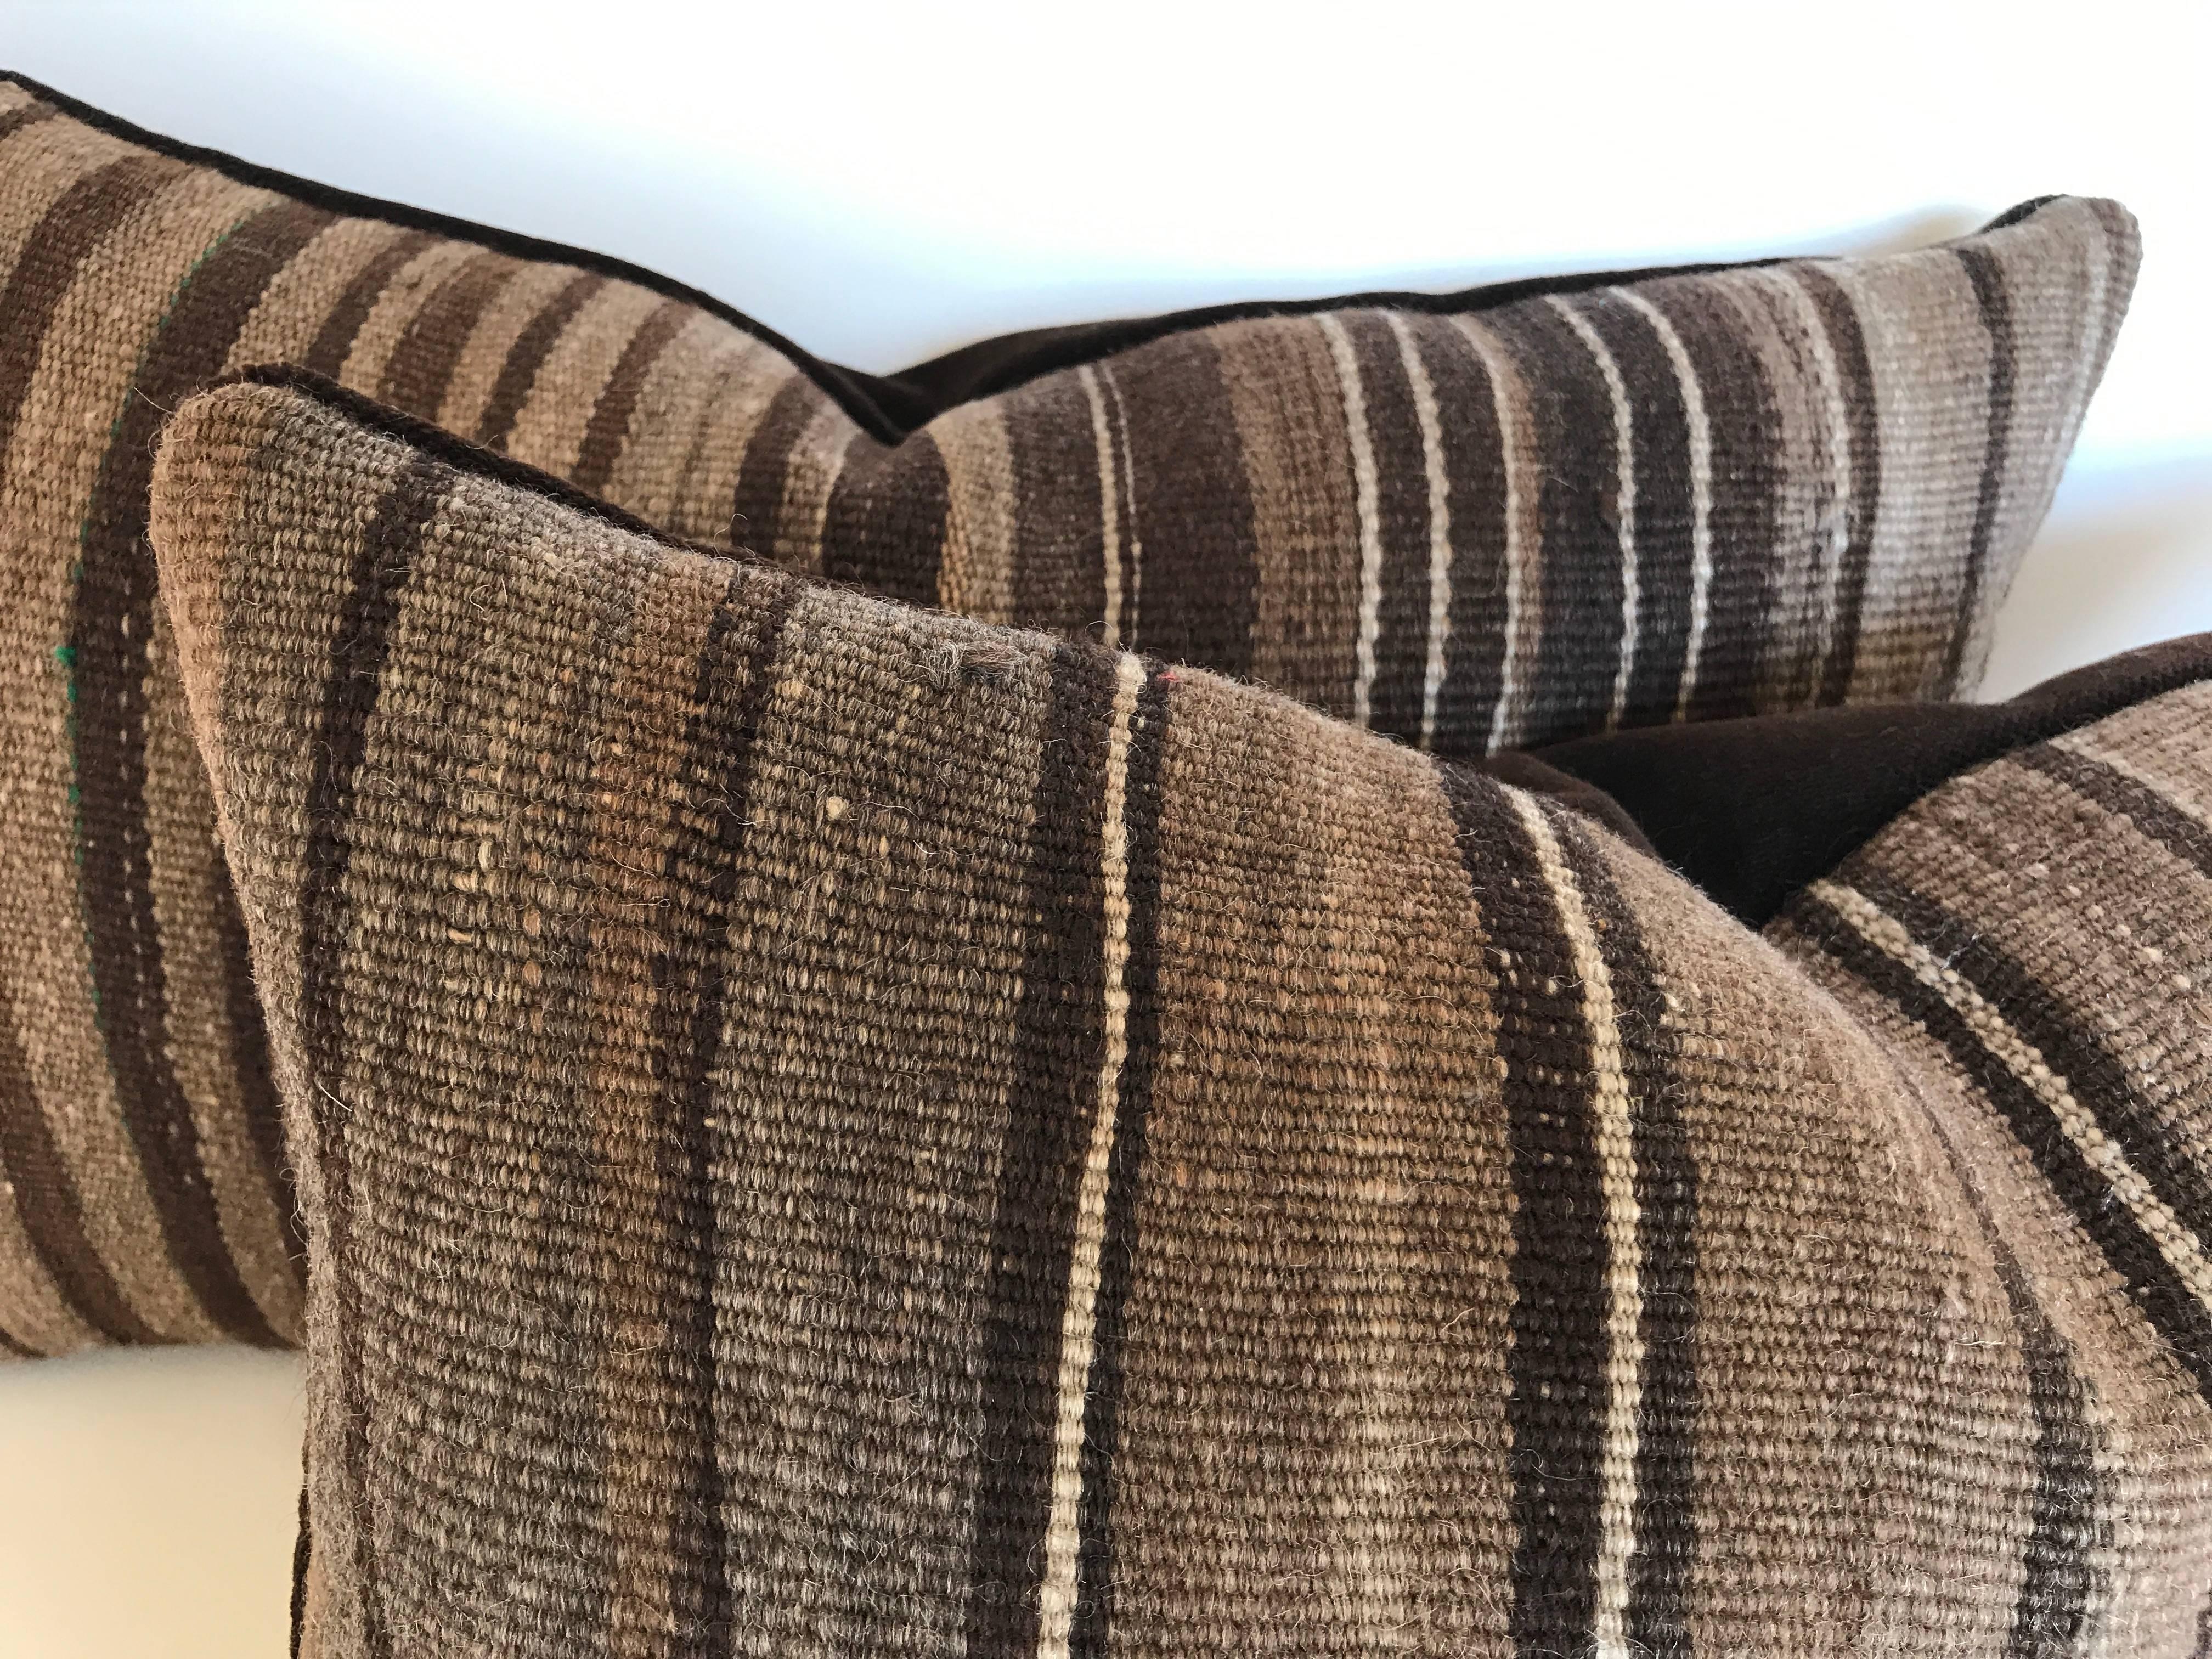 Custom pillows cut from a vintage hand-loomed wool Moroccan Berber rug from the Atlas Mountains. Wool is soft and lustrous with all natural colors in shades of brown. Pillows are backed in dark brown velvet, filled with an insert of 50/50 down and